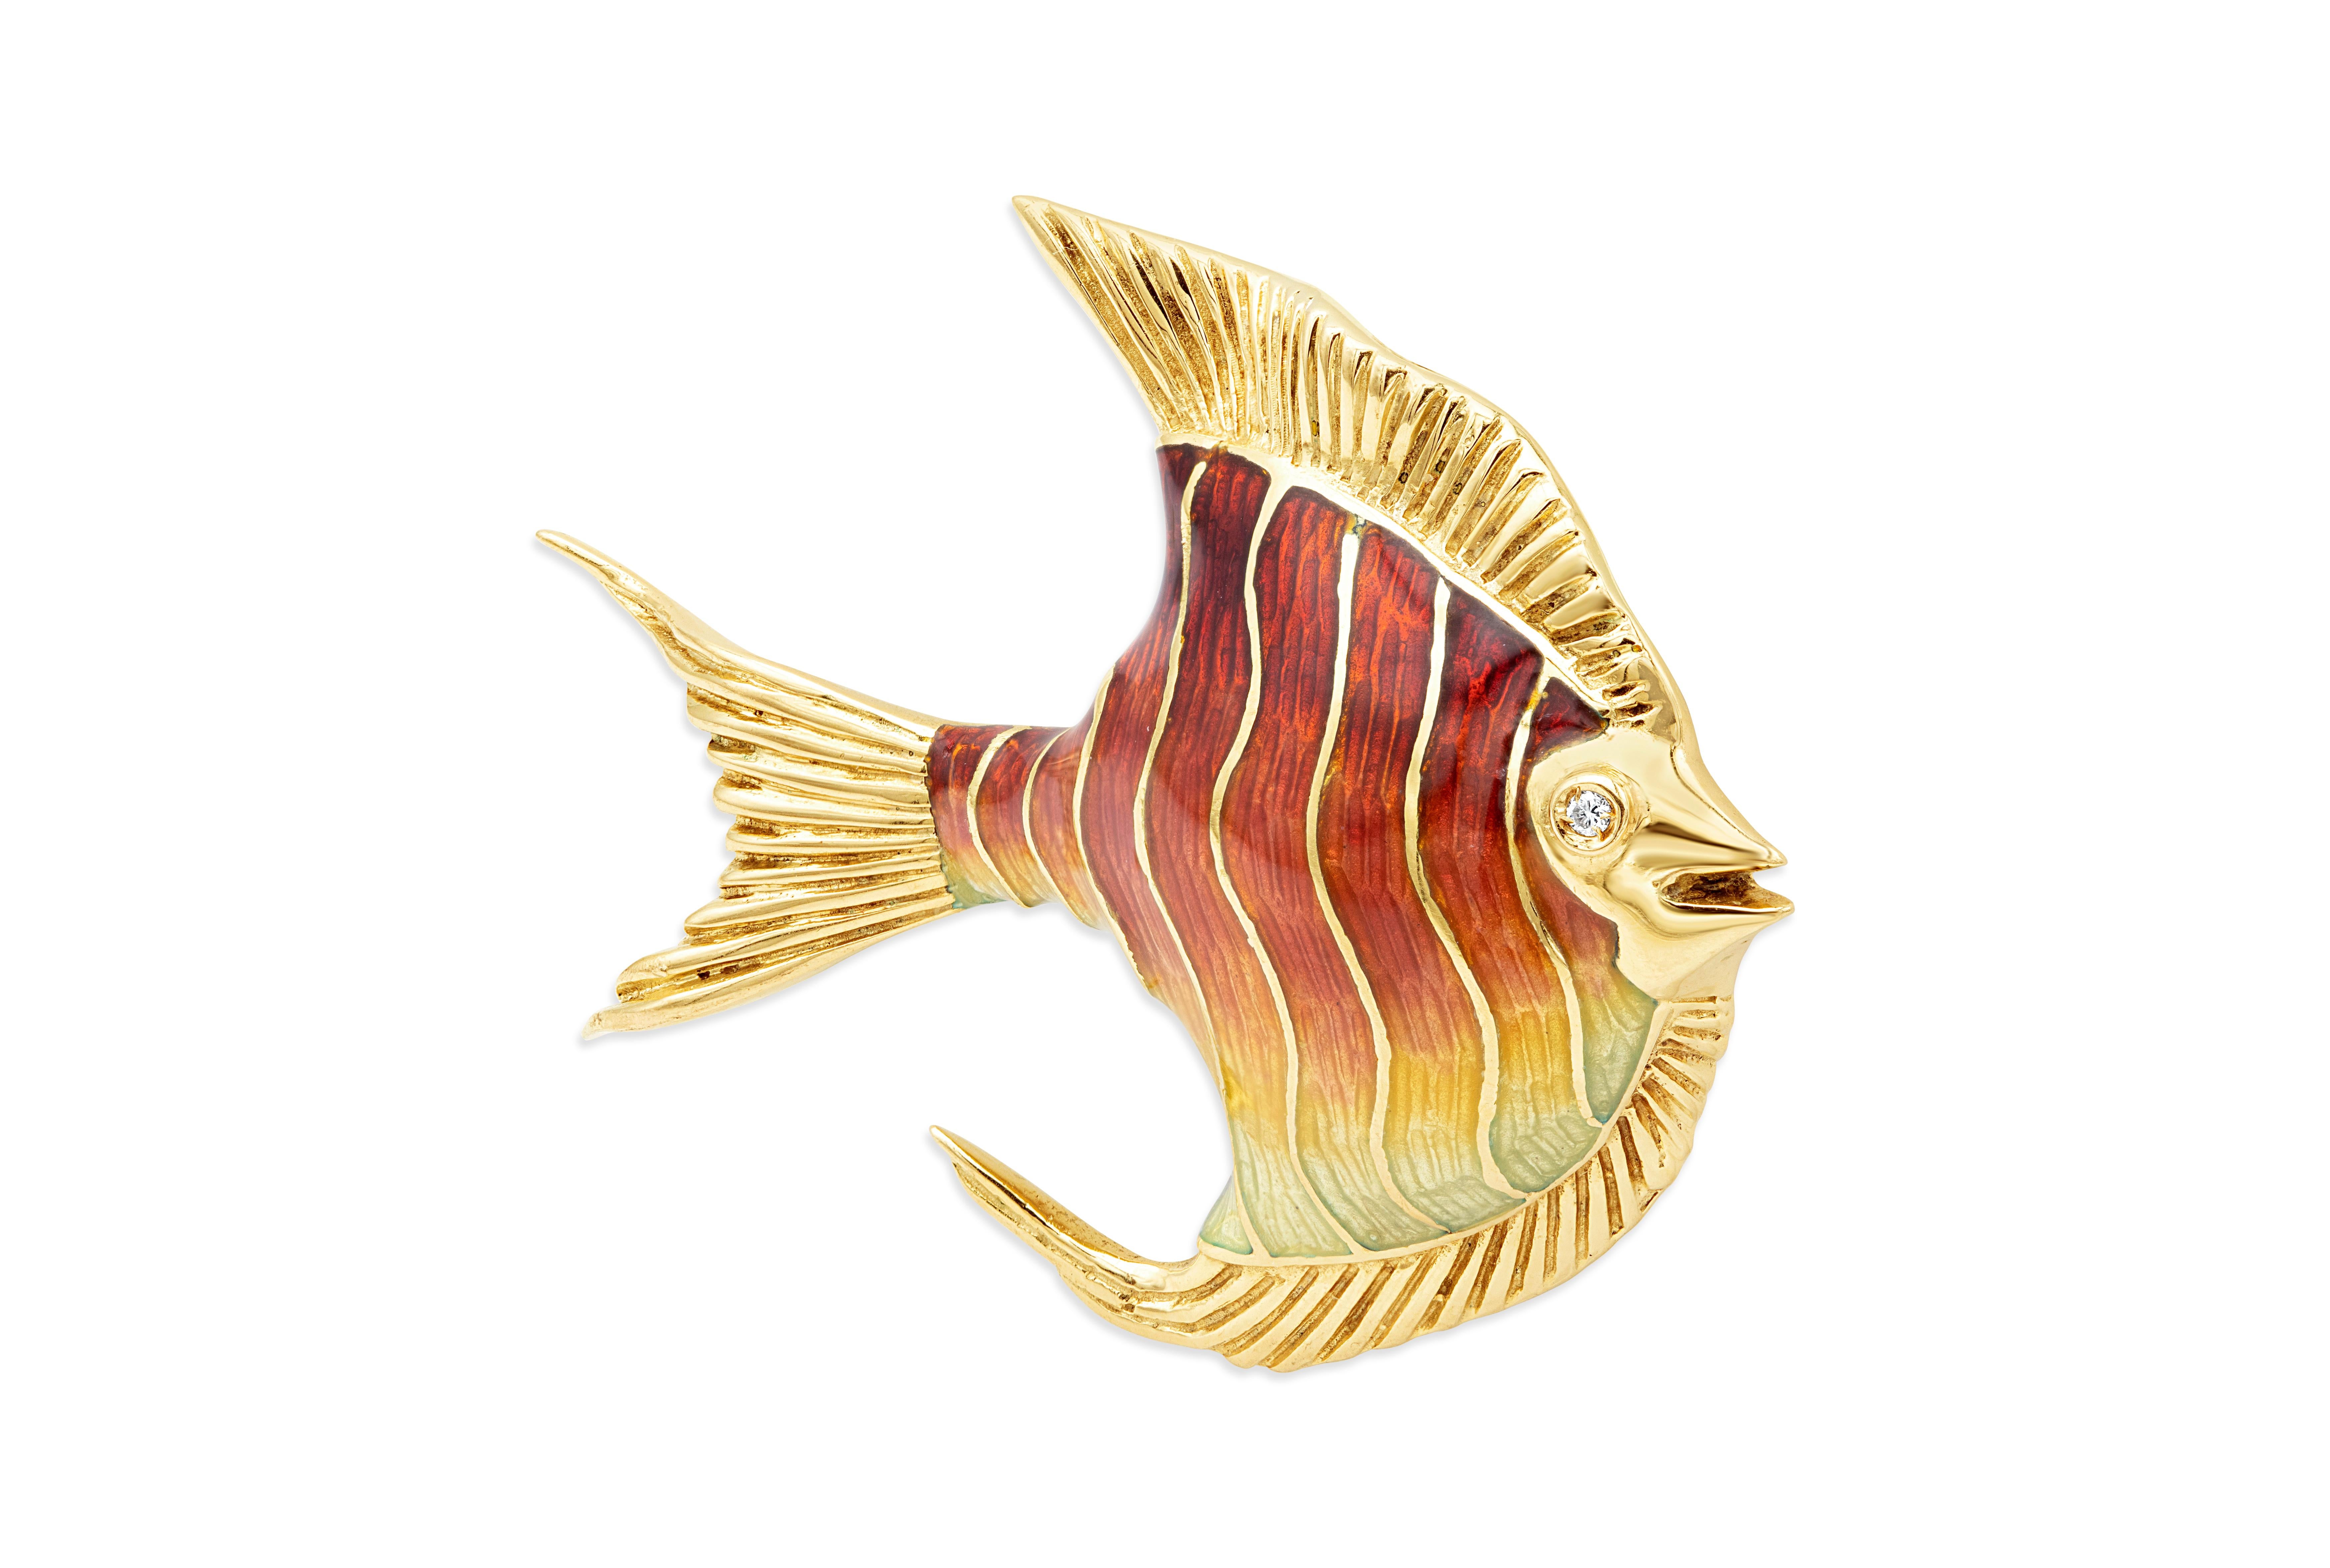 A well-crafted 18K Yellow Gold brooch in an Angel fish design accented with red enamel and round brilliant diamond eyes.

